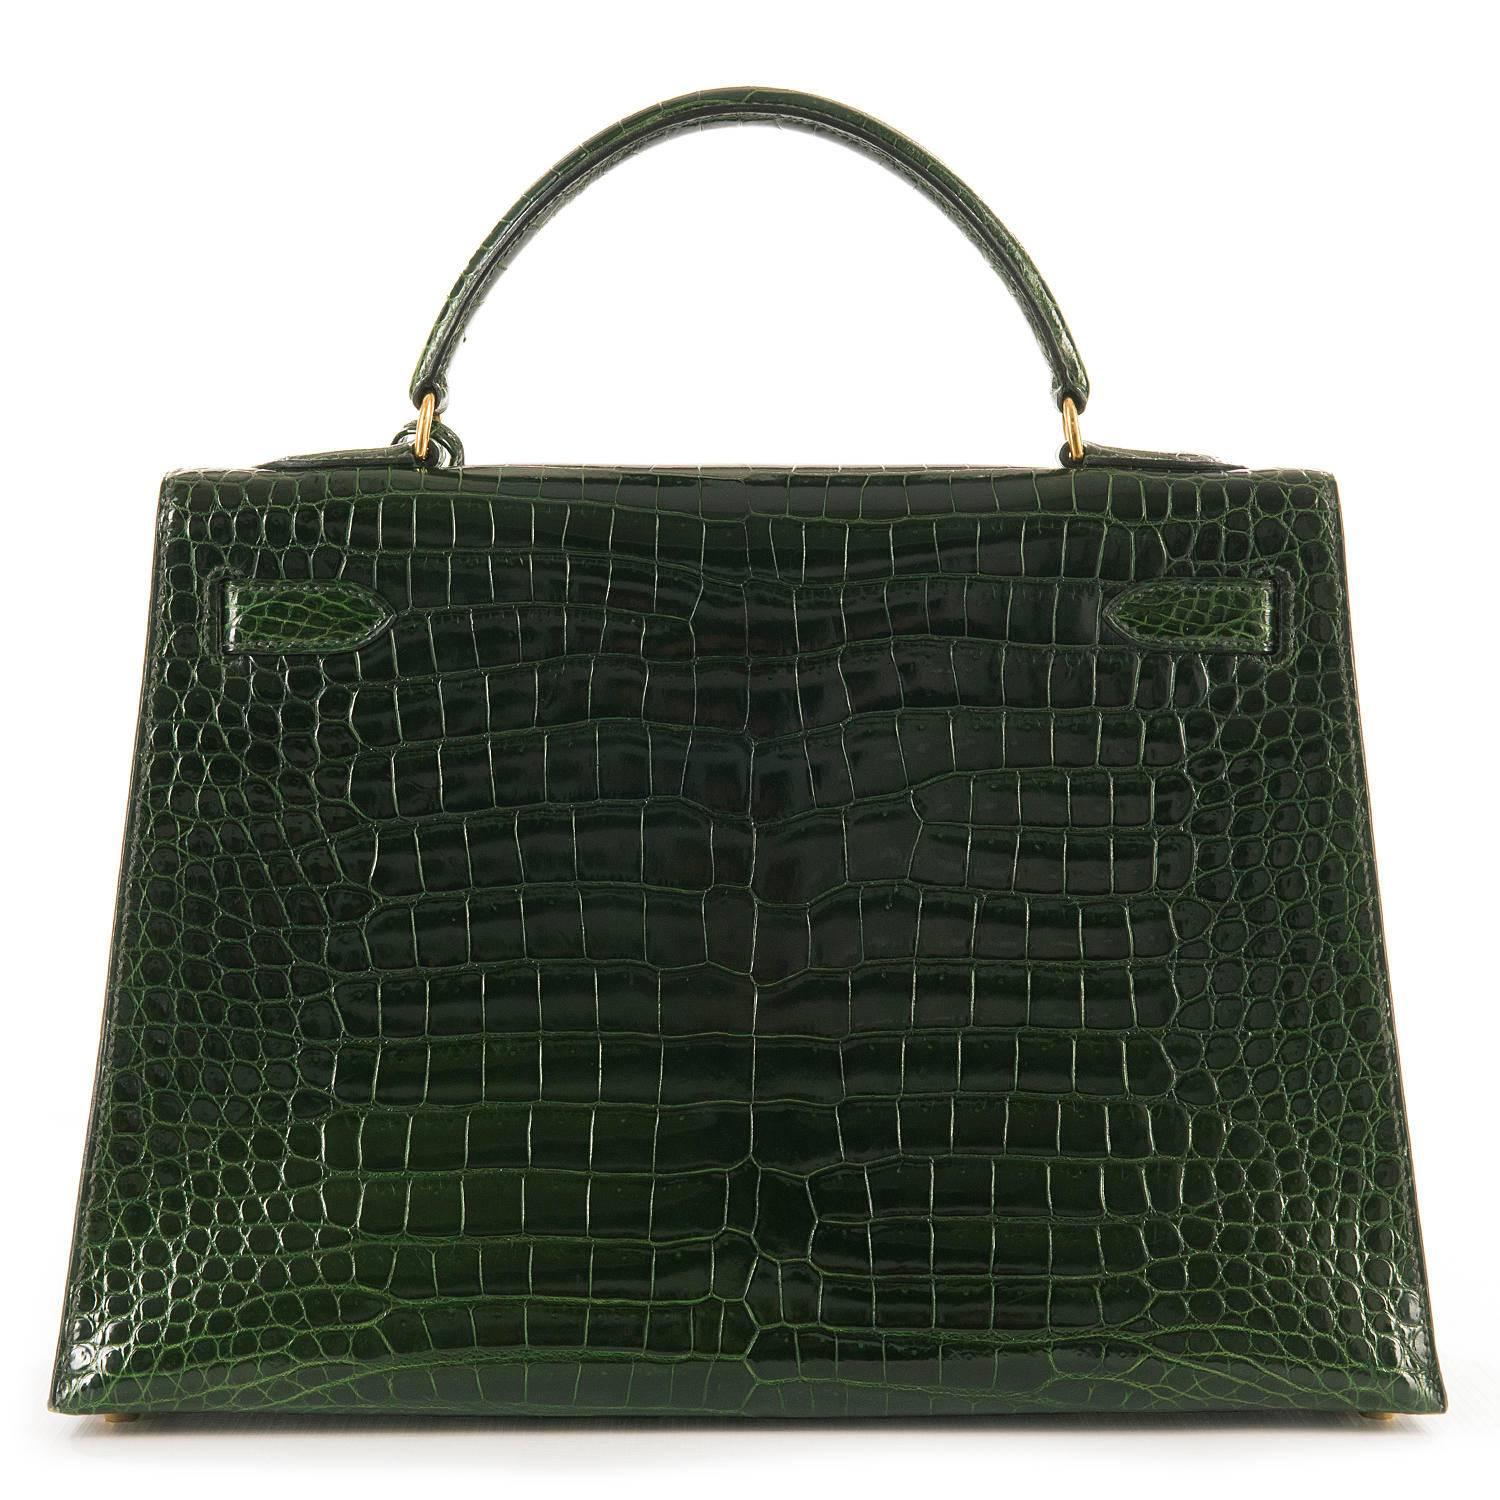 Simply the most stunning Hermes 32cm Shiny Crocodile Kelly Bag. In exclusive Emerald Green with Gold Hardware, the bag is in absolutely pristine, 'As New' condition and comes complete with it's shoulder strap, key-fob & keys, padlock and